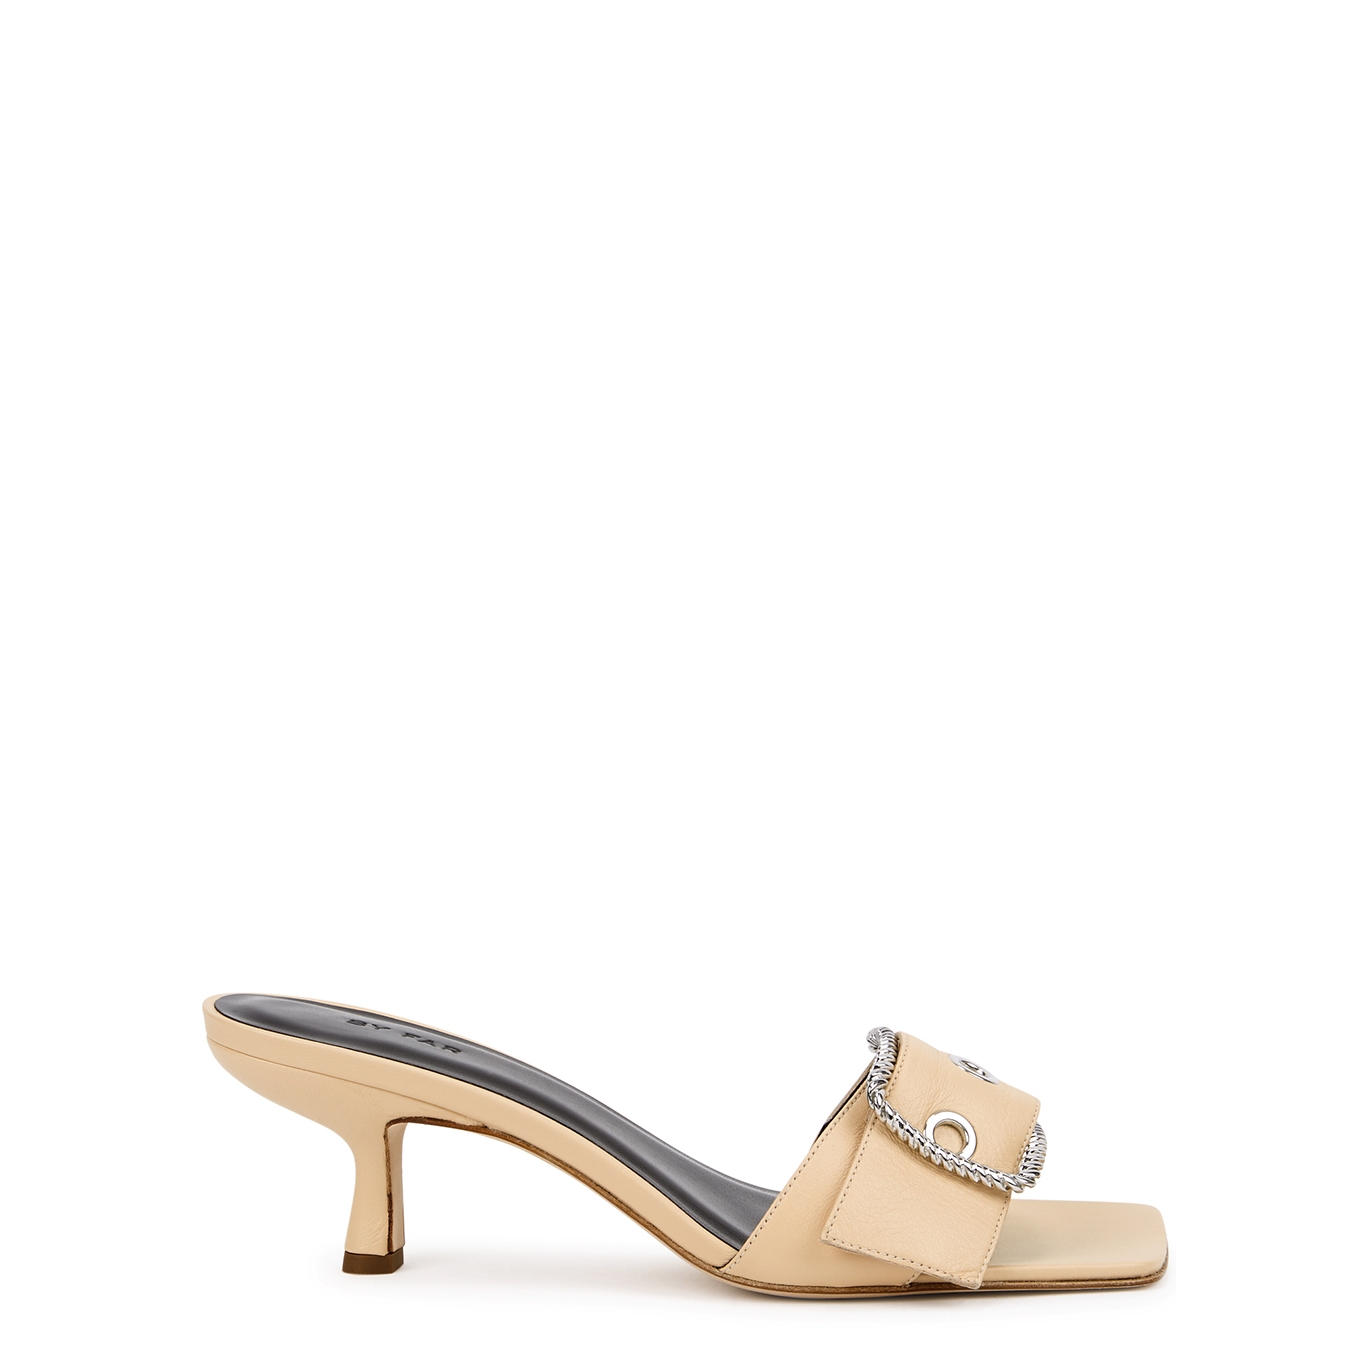 BY Far Devina 60 Buckle-embellished Leather Mules - Cream - 6